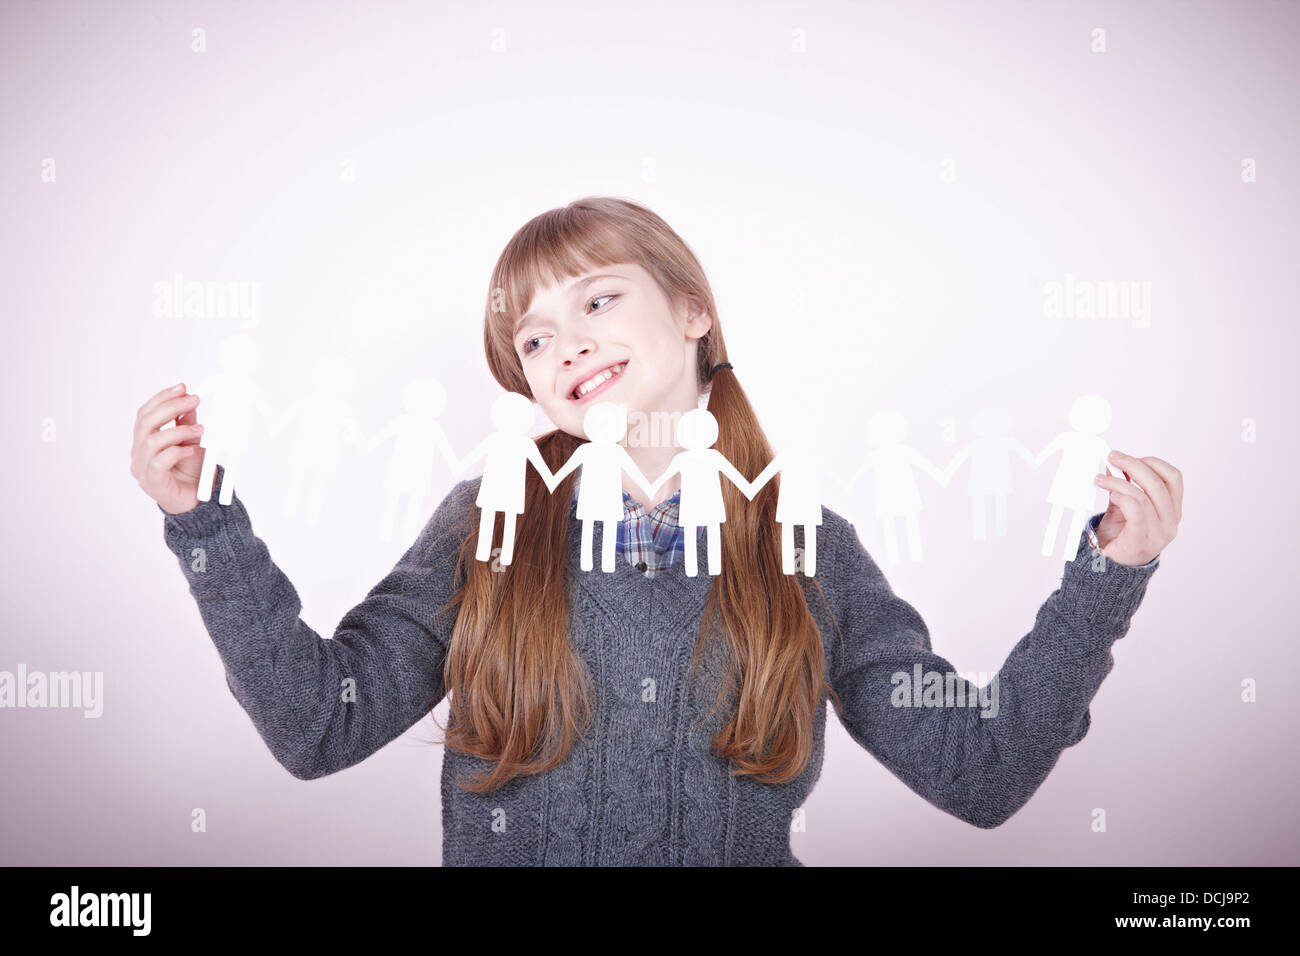 a girl holding continuous paper icons of human Stock Photo